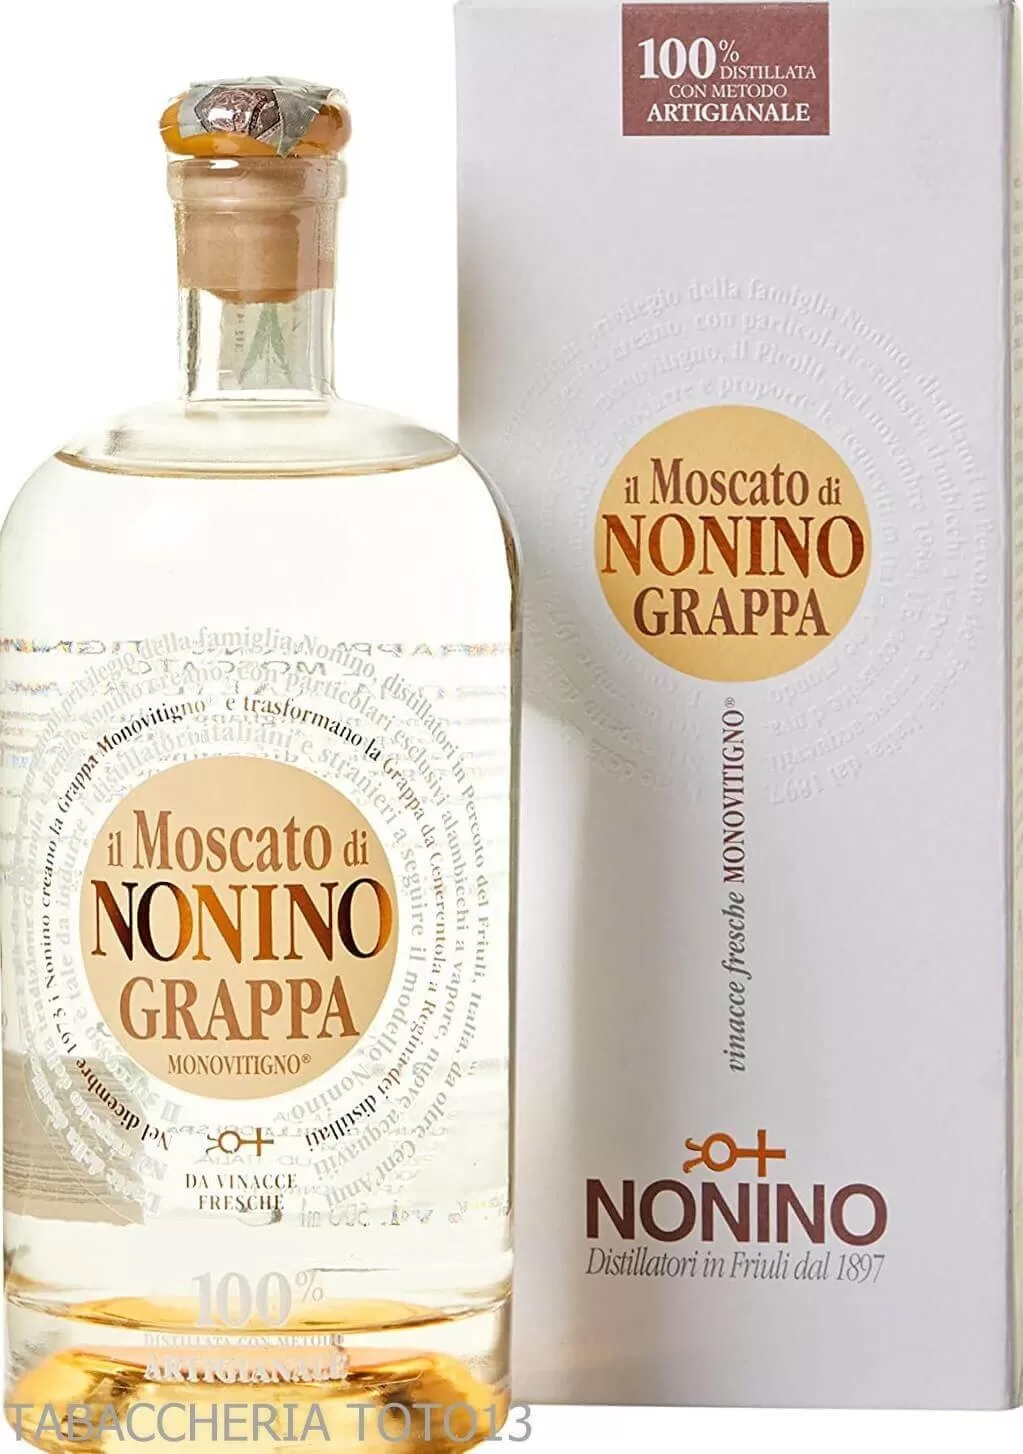 Nonino grappa single-variety Moscato bottle 500ml | selling Online